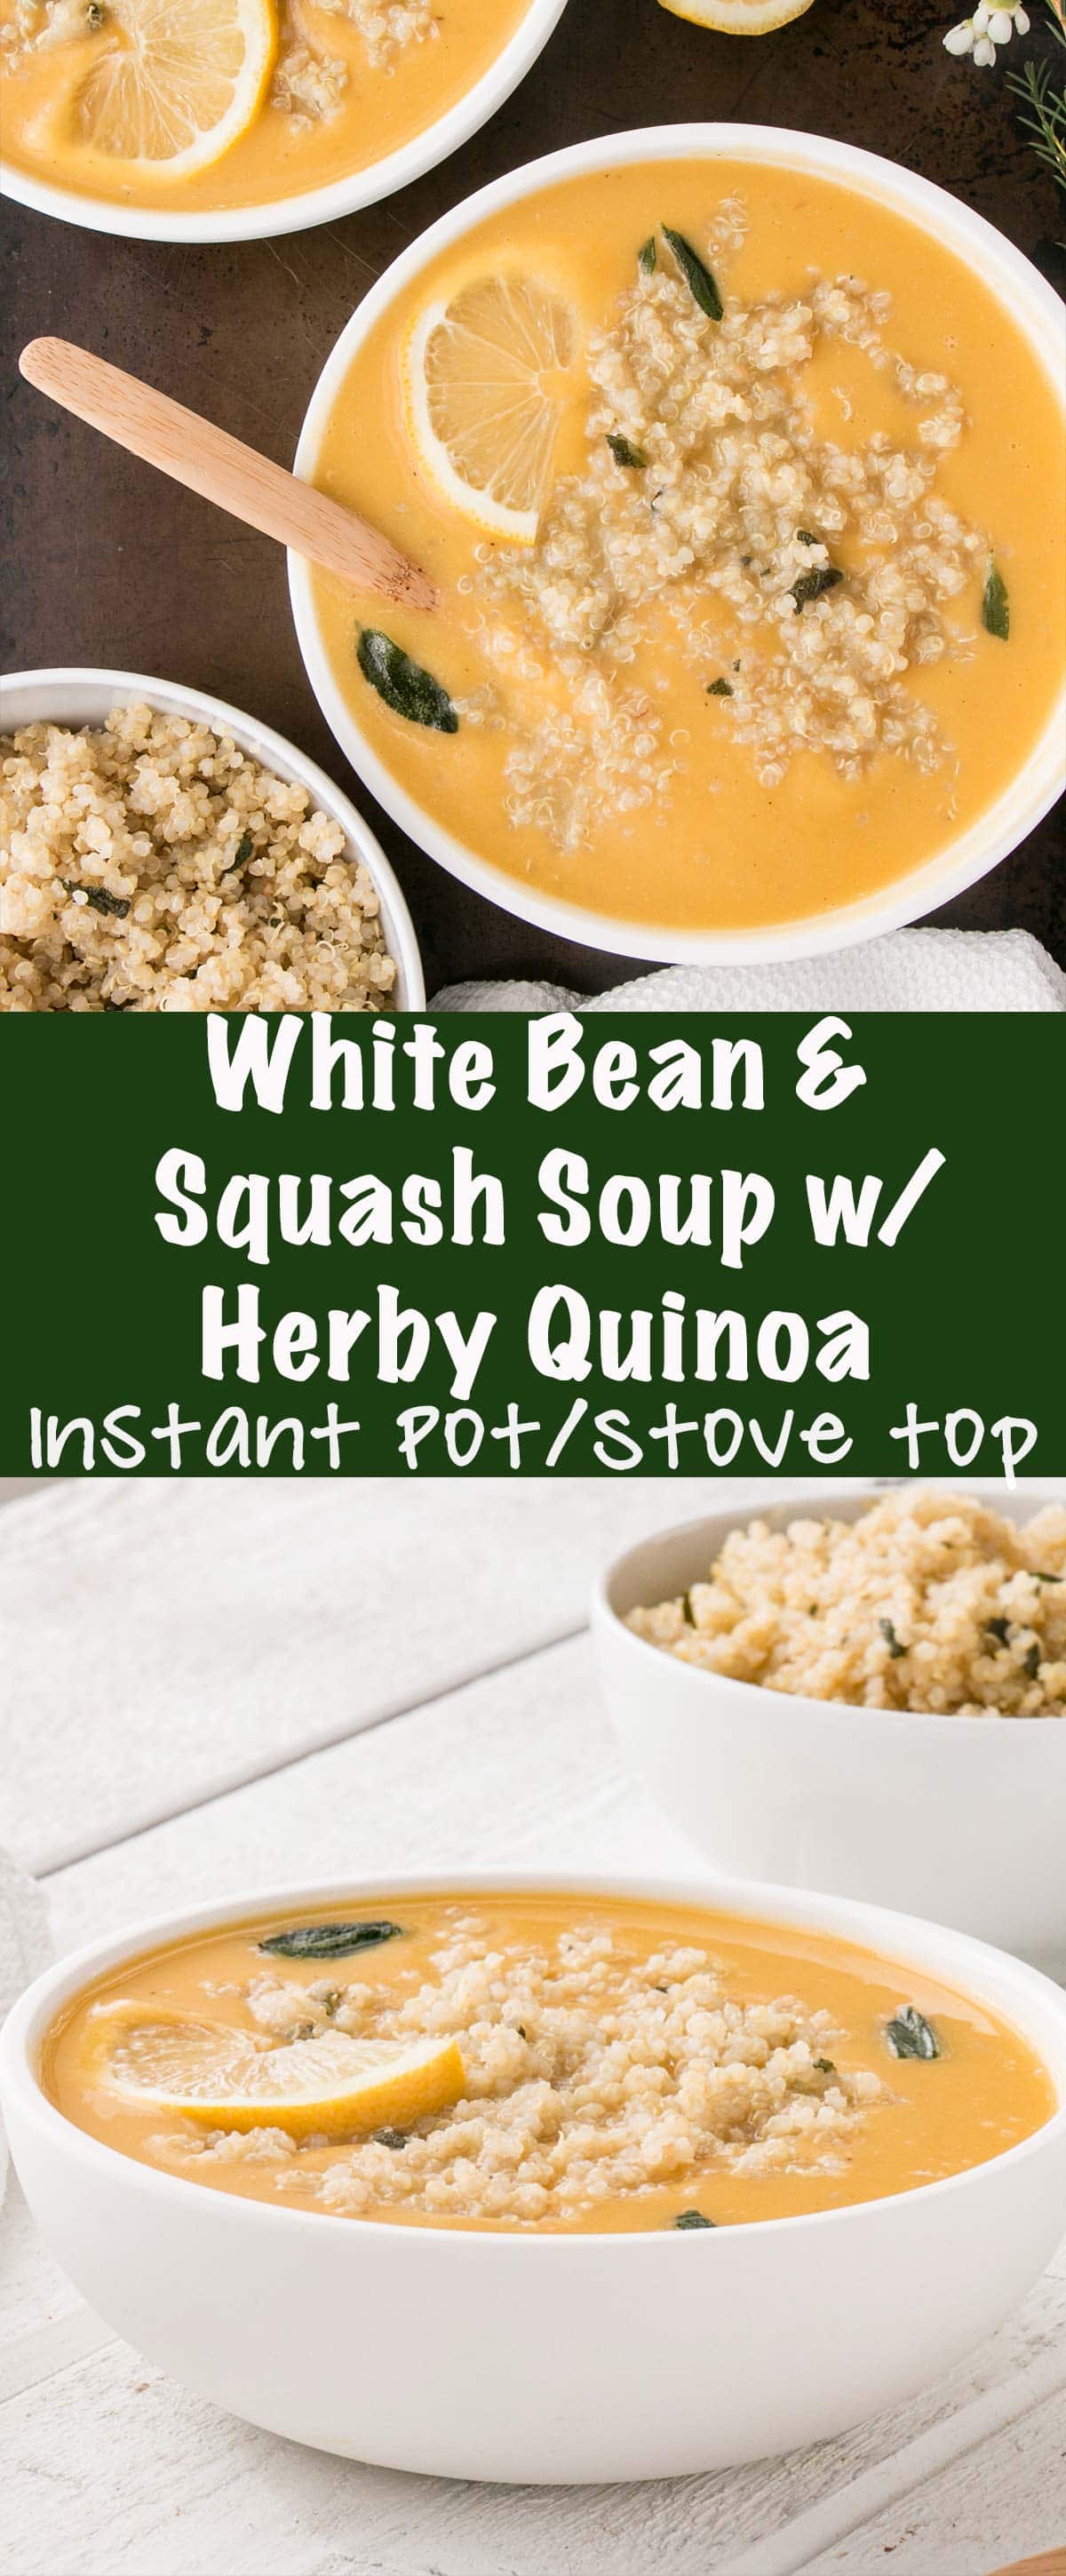 White Bean and Squash Soup with Herby Quinoa is a silky smooth soup with flavourful and satisfying herby quinoa. Make on the stove or in the Instant Pot! #instantpot #soup #vegan #comfortfood